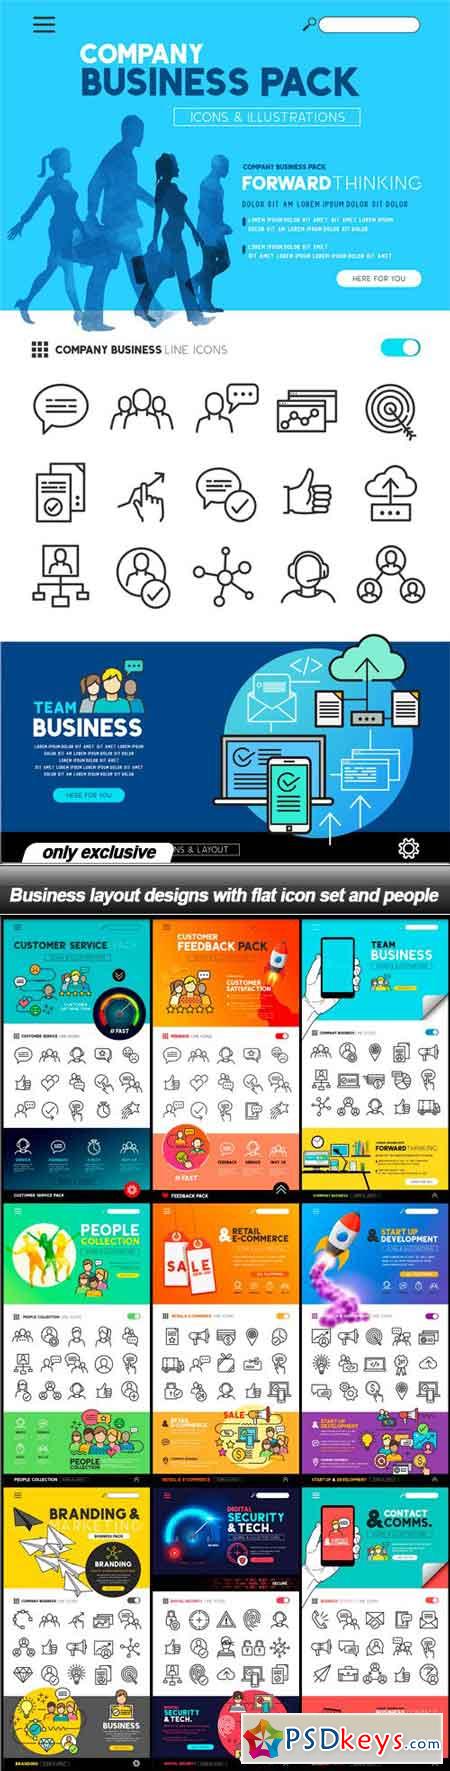 Business layout designs with flat icon set and people - 10 EPS